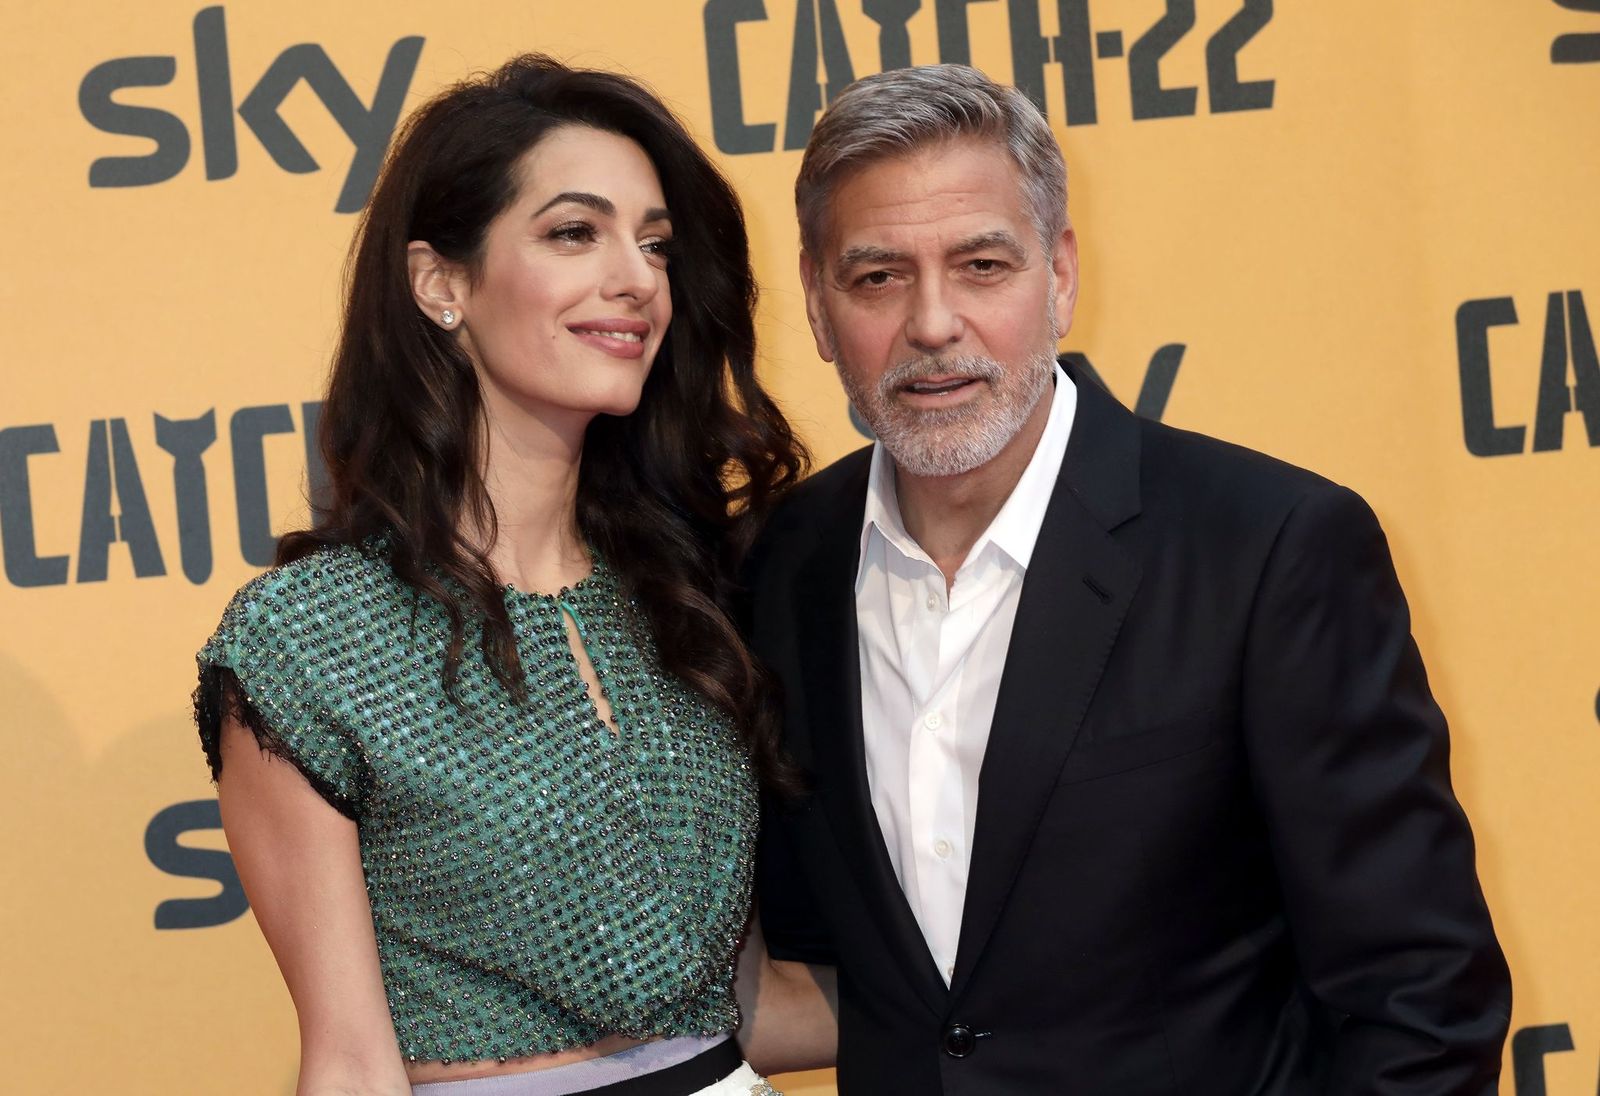 Amal and George Clooney at "Catch-22" Photocall on May 13, 2019 at The Space Moderno Cinema. | Photo: Getty Images